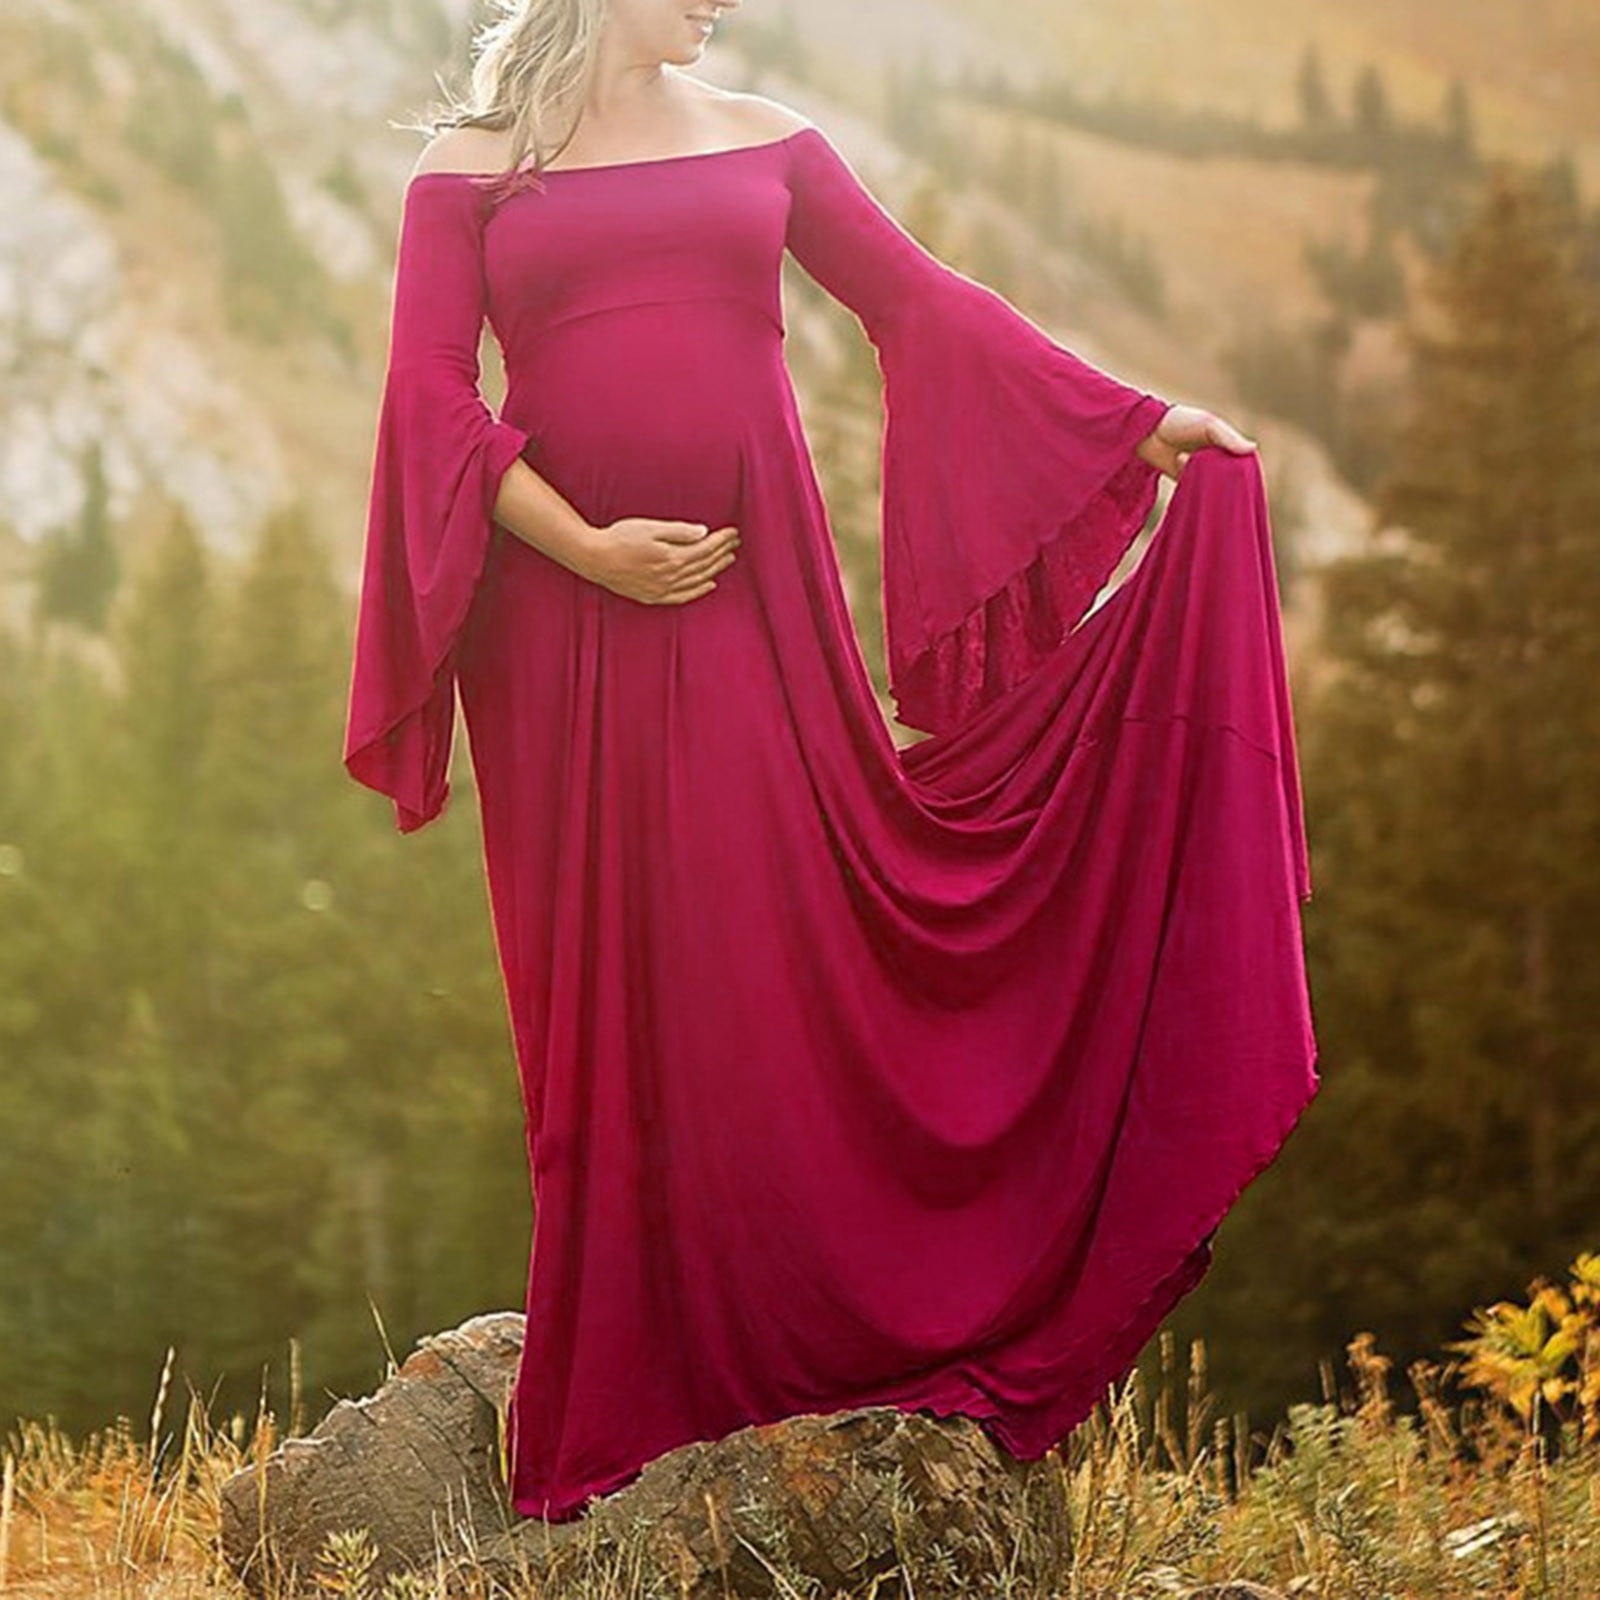 Metarnity Photoshoot Gown at Rs 6000/piece | Maternity Clothing in Surat |  ID: 2851570492812